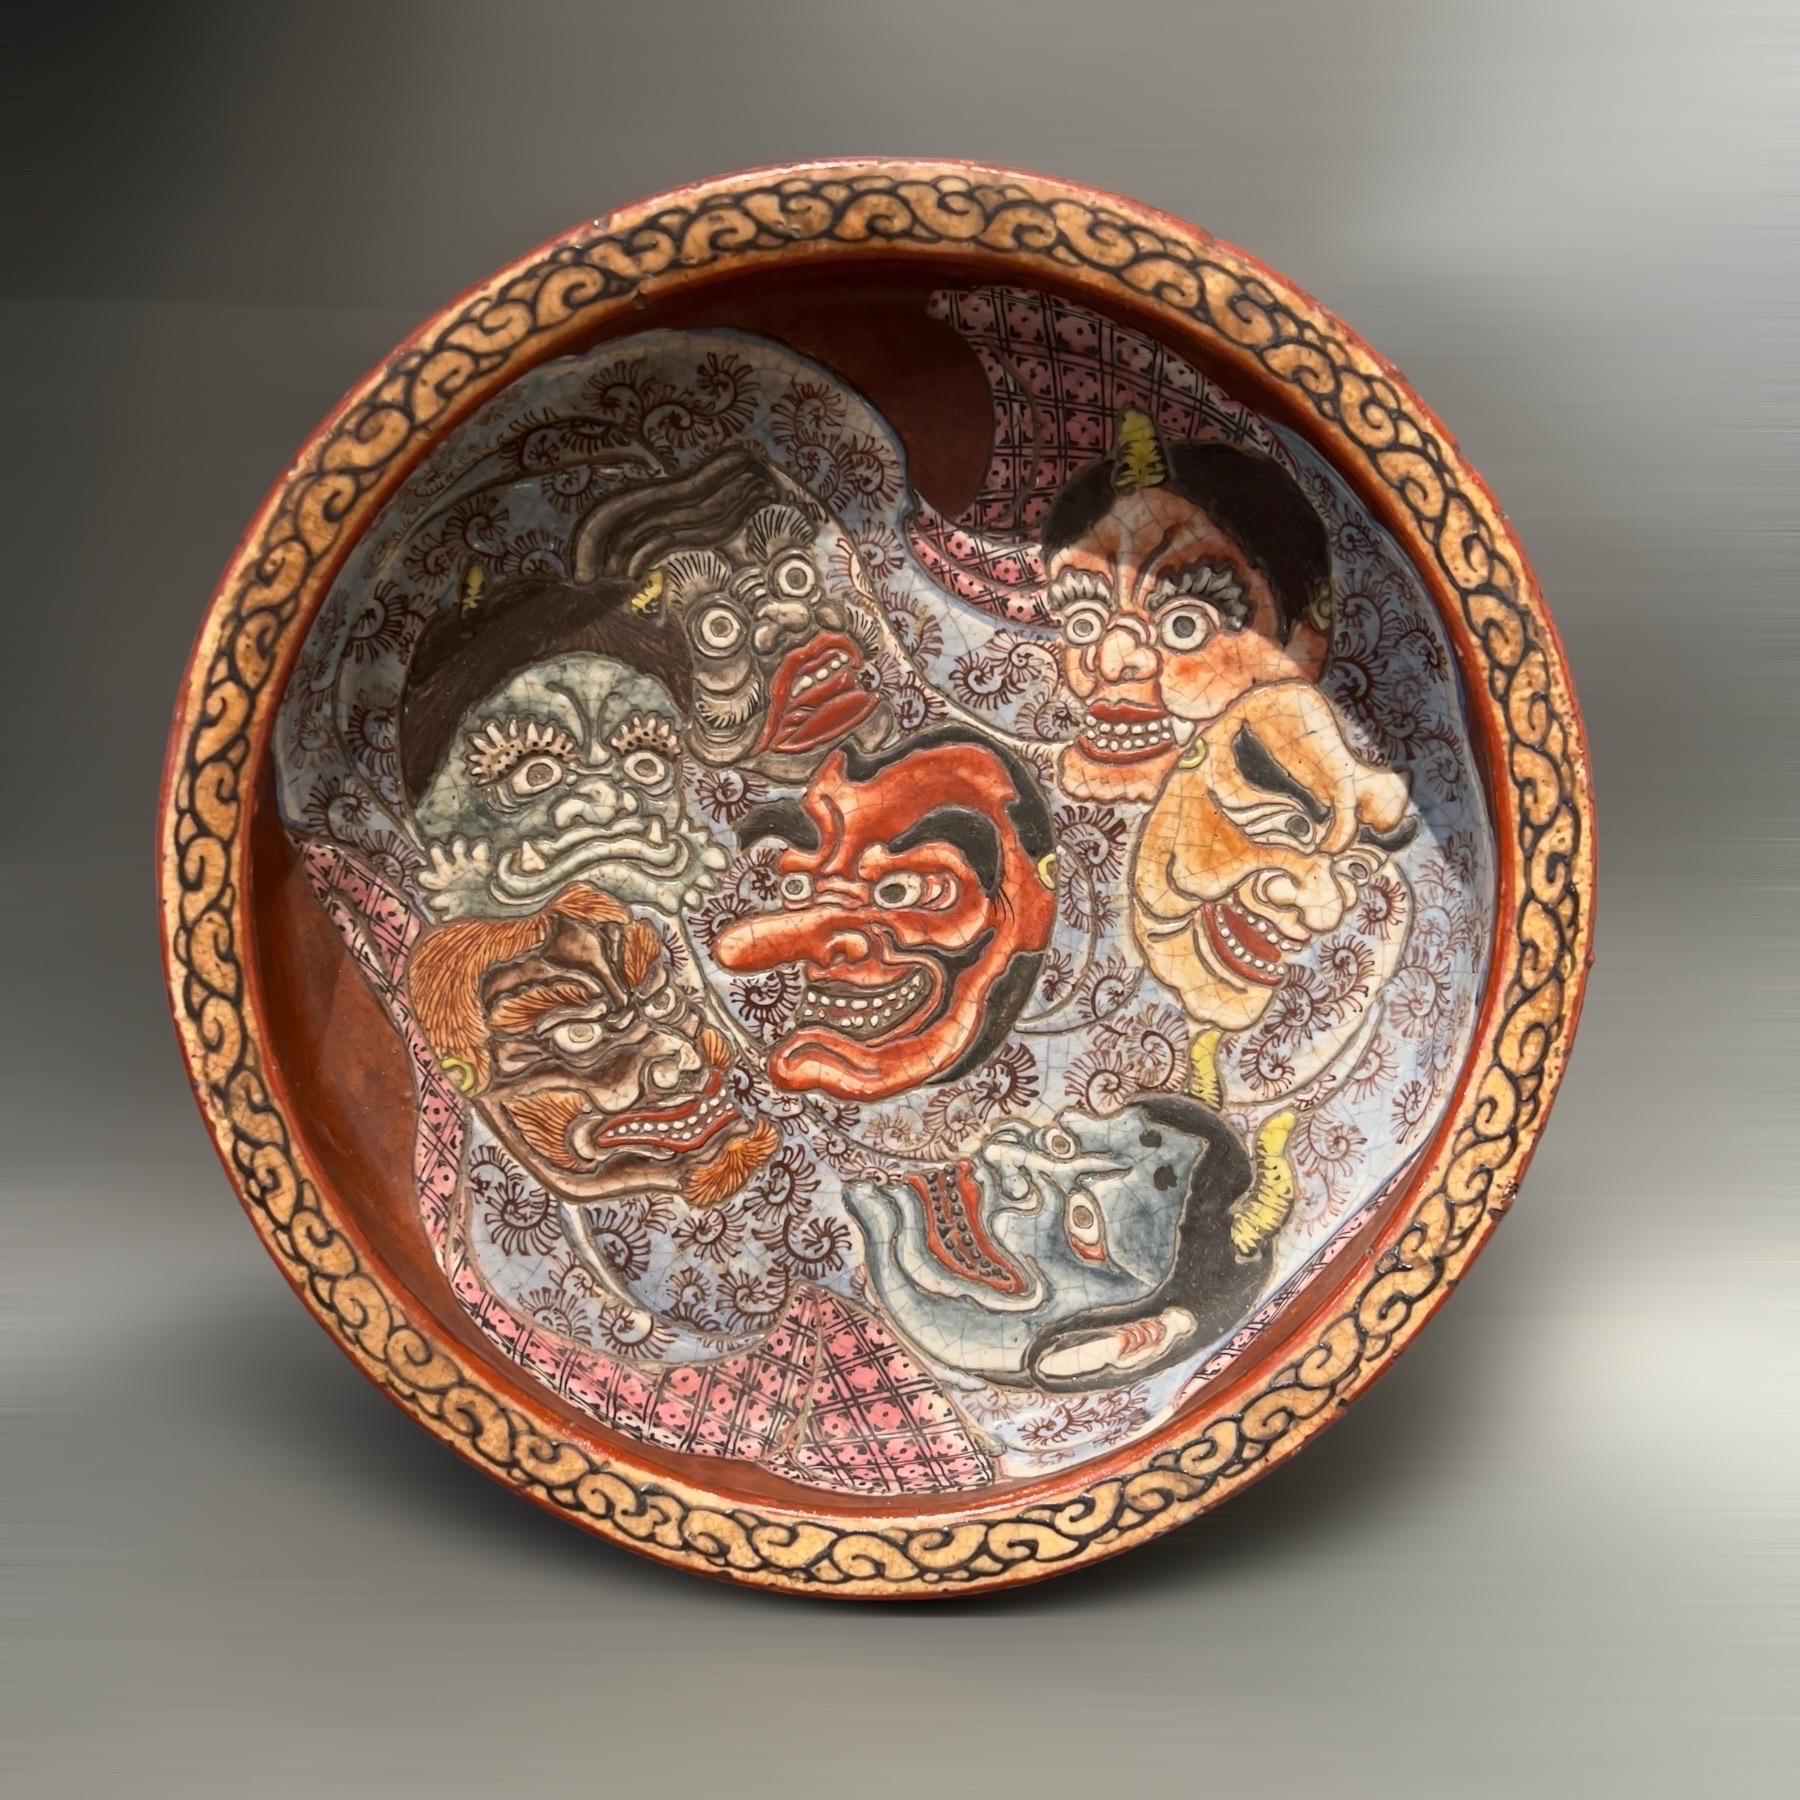 A very unusual decorated 3 feet Japanese bowl, the inside decorated with Noh Theatre masks.
Japan, Meiji period, 19th century
Very good condition with small baking defects normal for this king of ceramic.